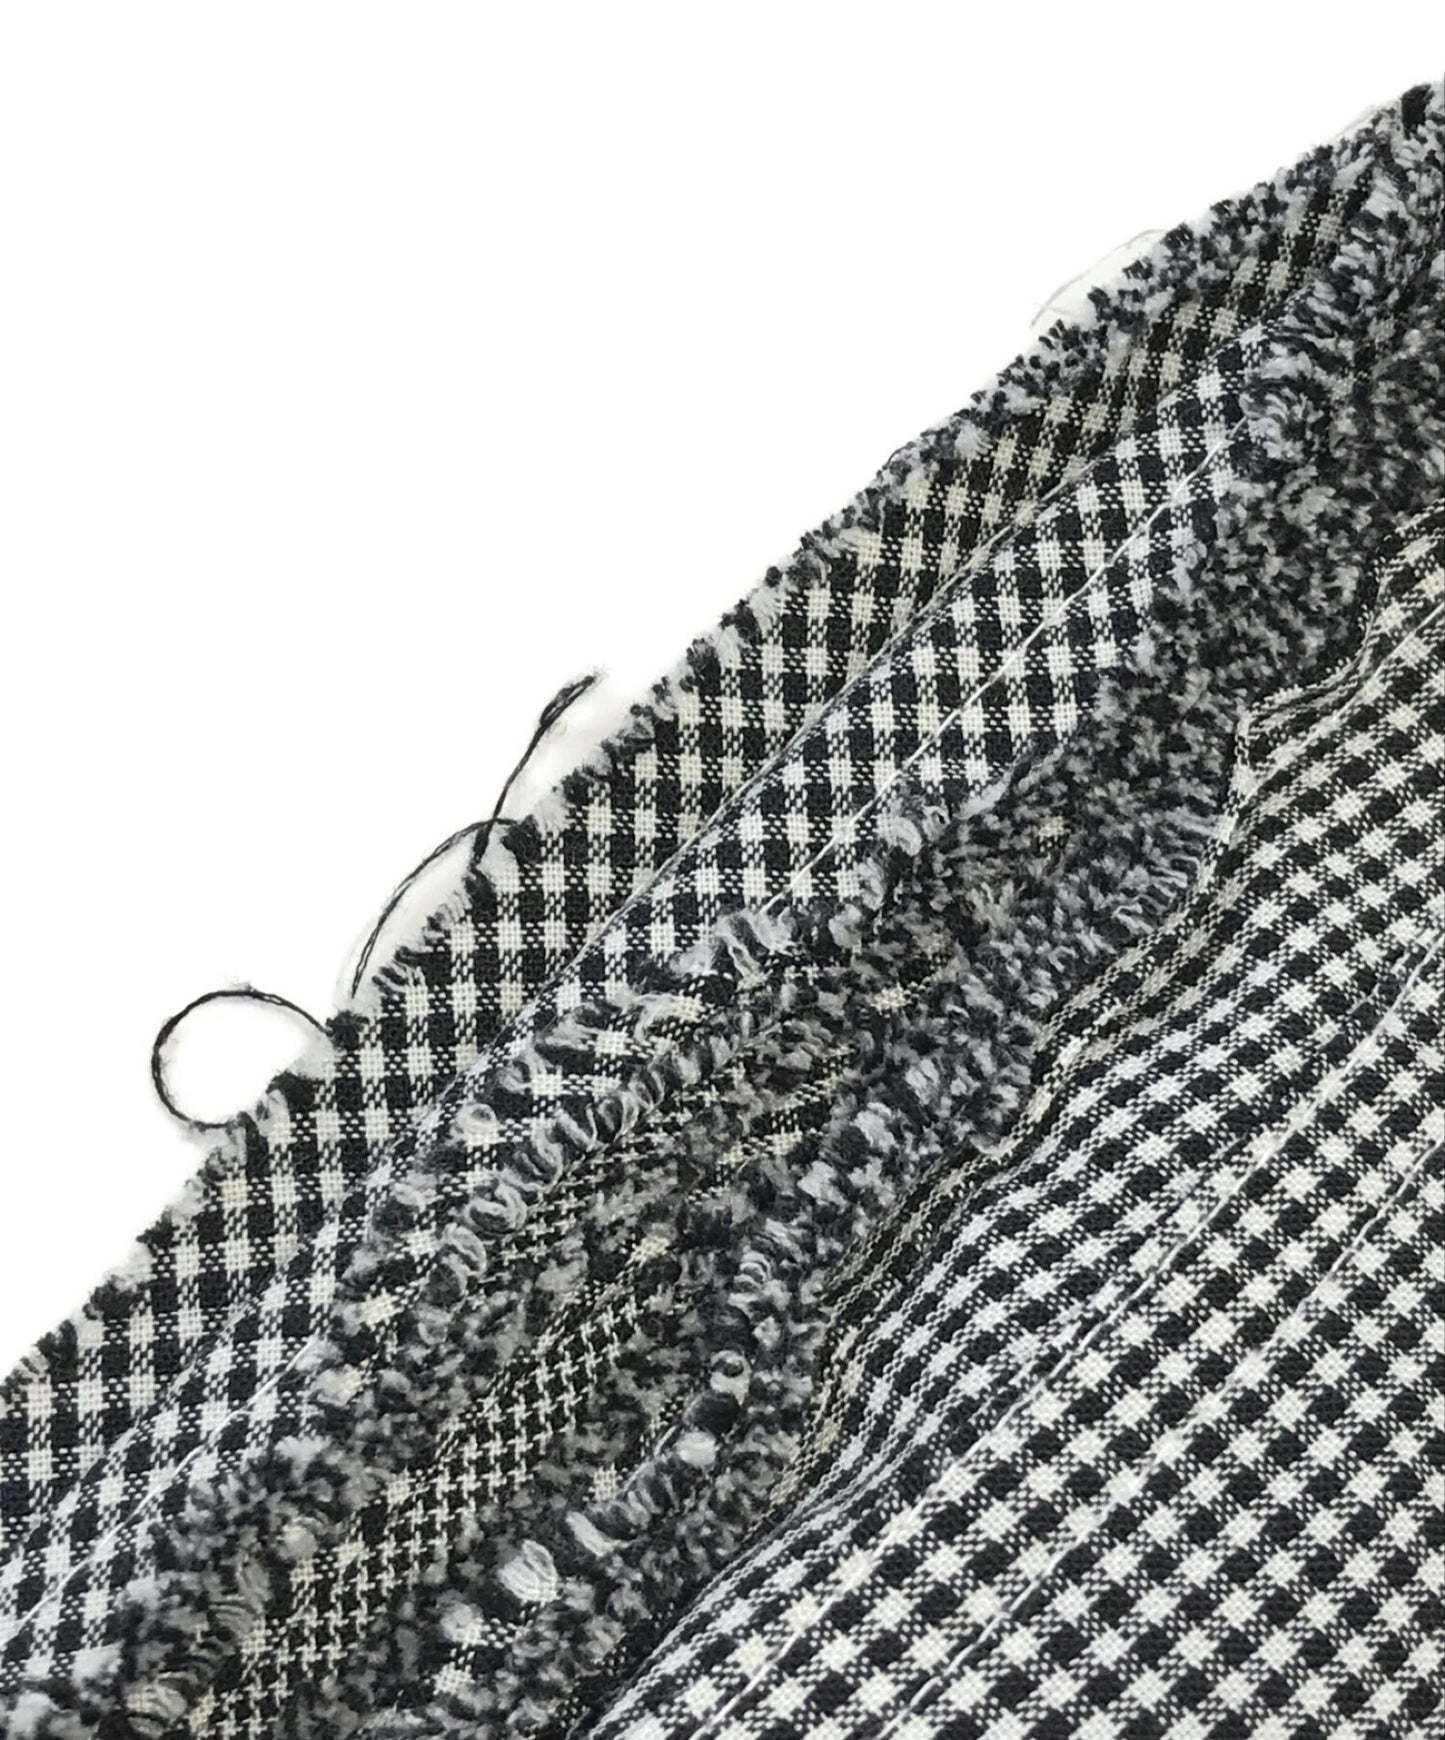 Tricot Comme Des Garcons Gingham 체크 측면 수집 바지 TP-0011S